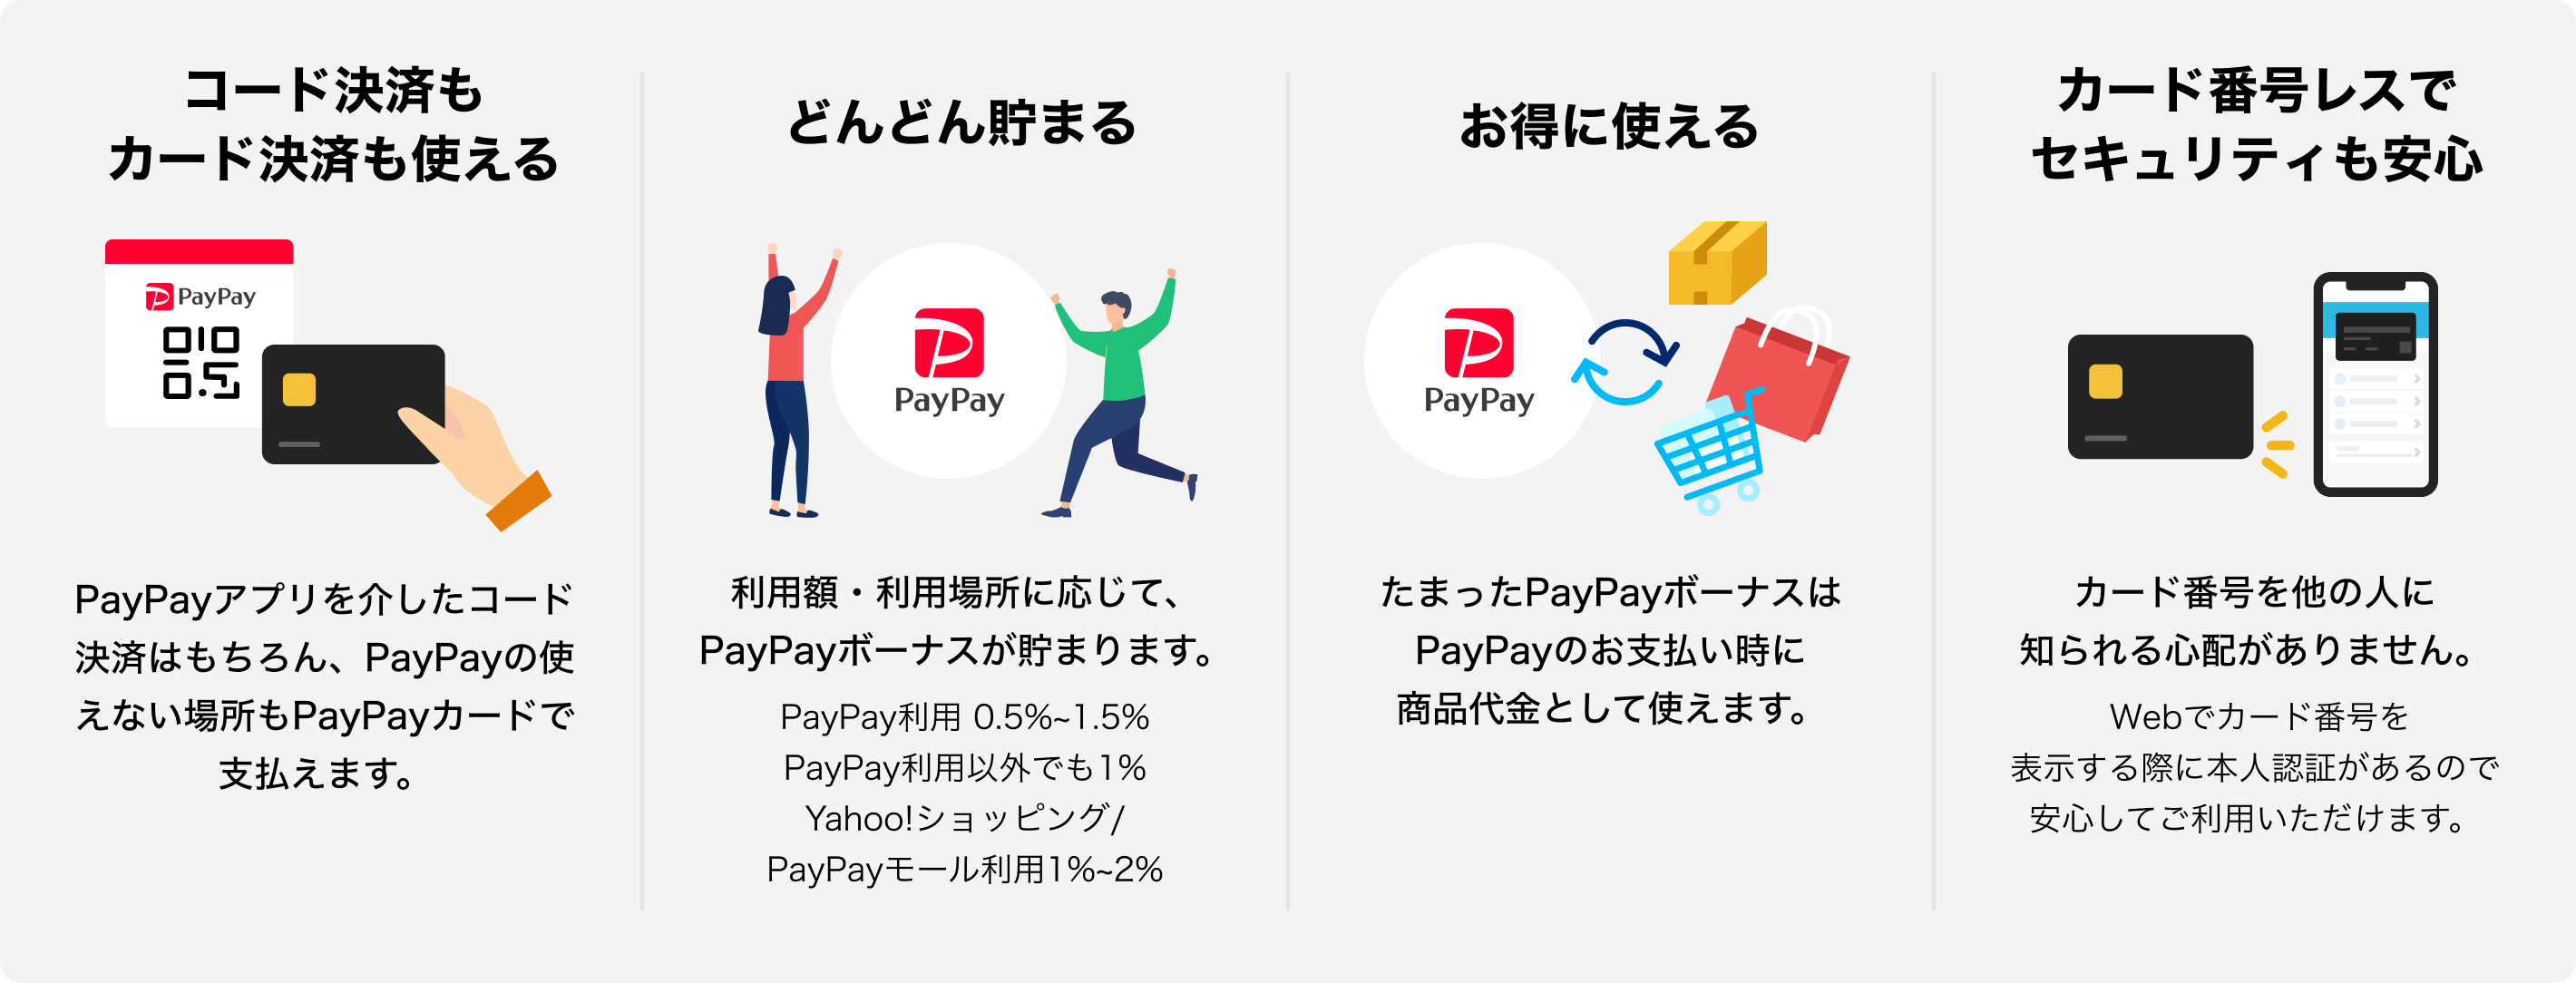 paypaycard_release_01